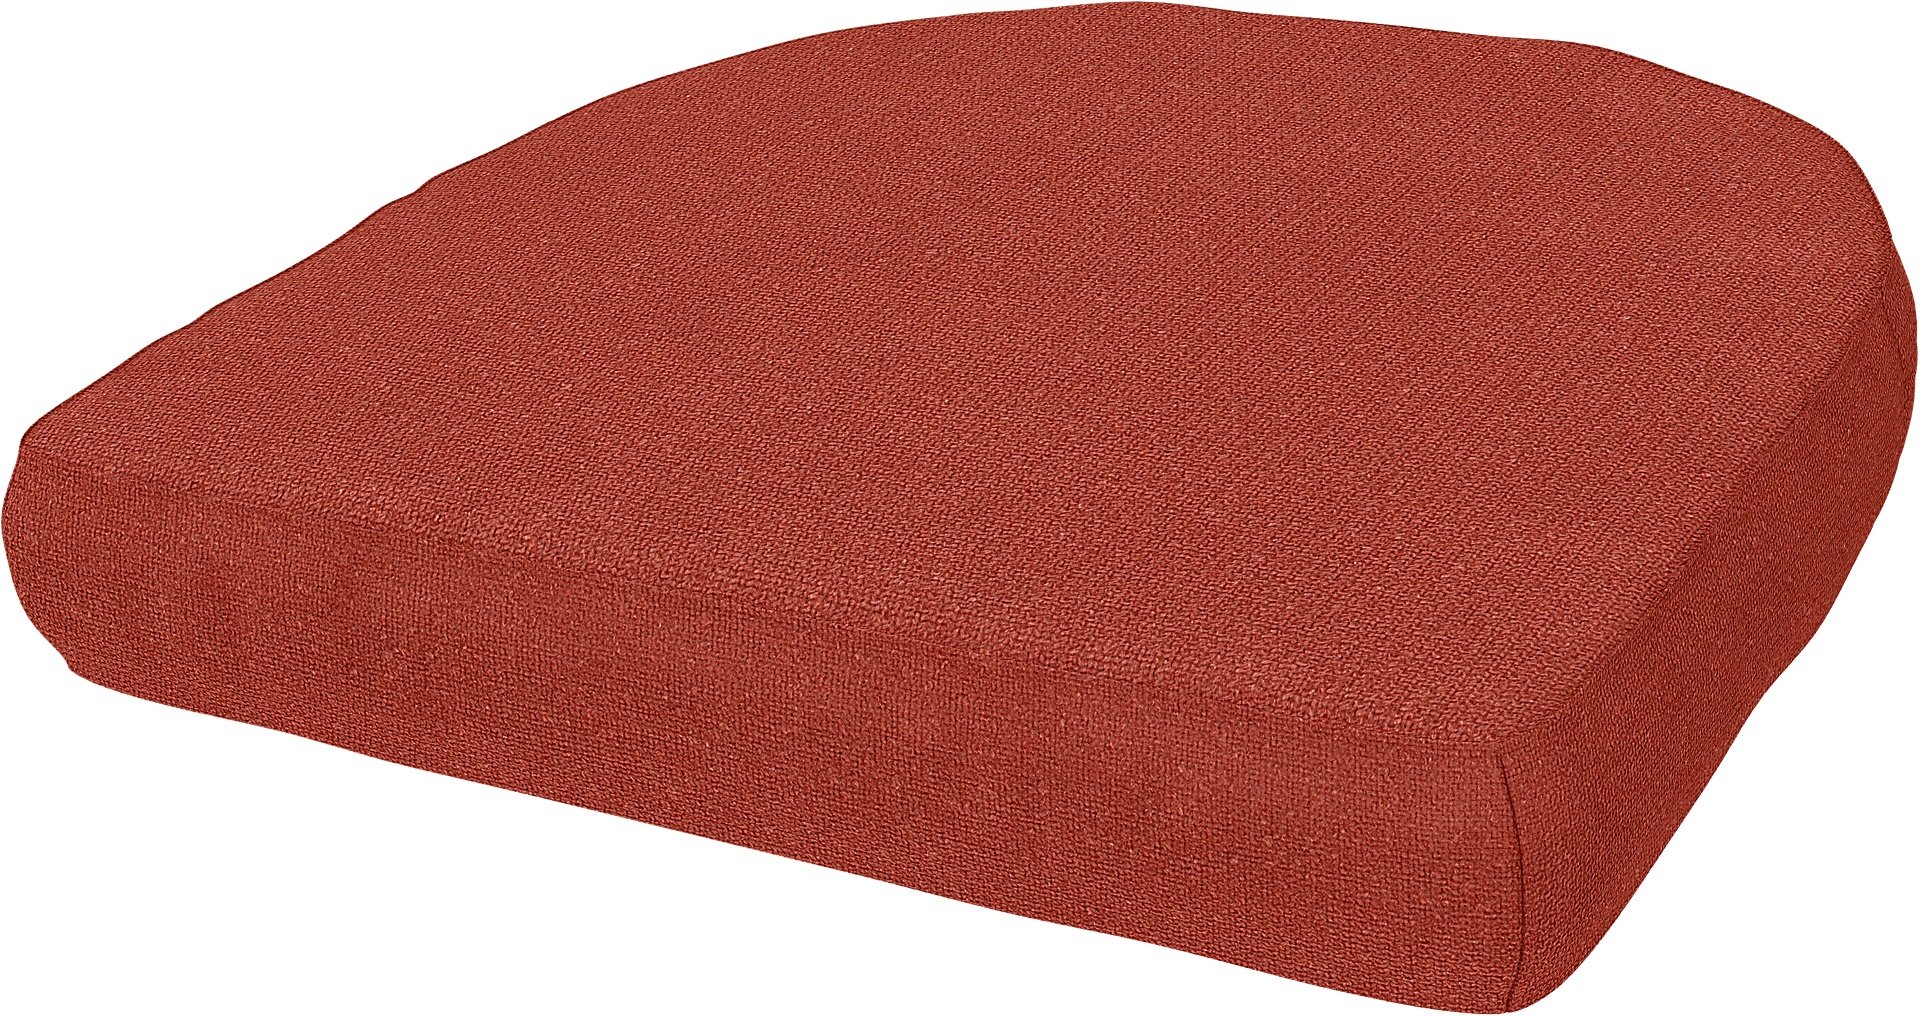 IKEA - Mastholmen Armchair Cushion Cover, Coral Red, Outdoor - Bemz